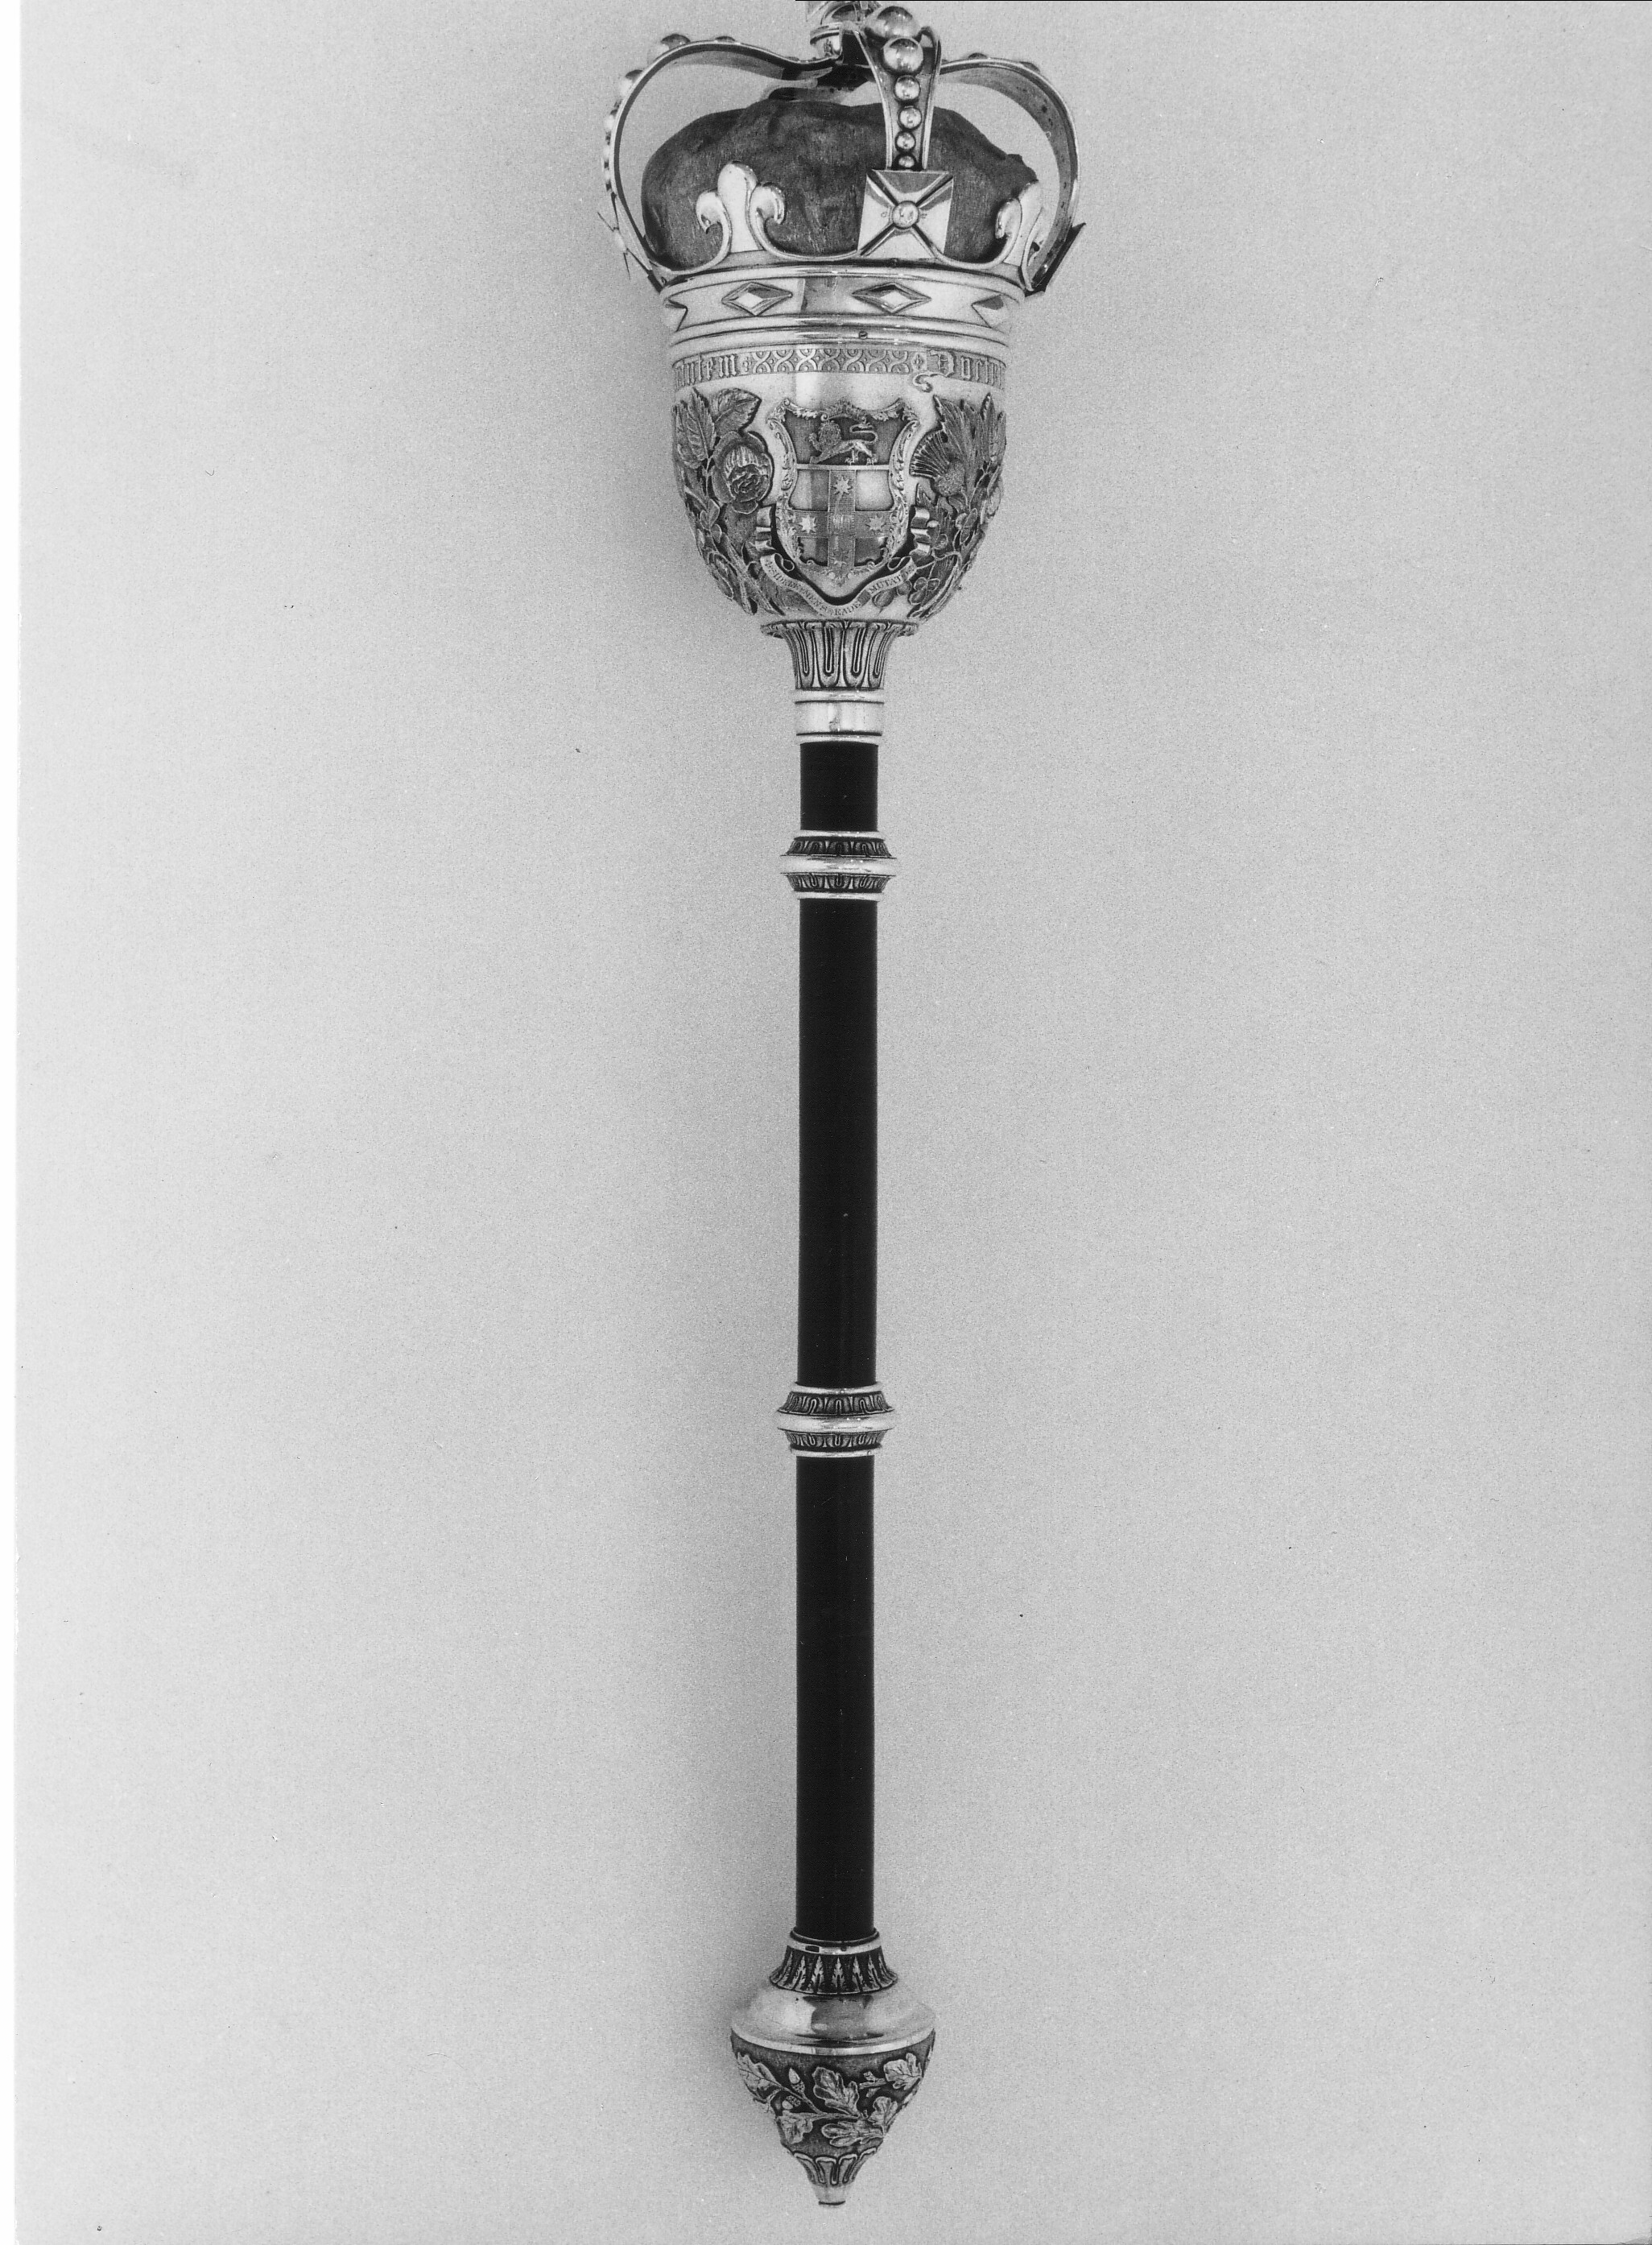 PHOTOGRAPHS OF THE UNIVERSITY MACE, INCLUDING DETAIL OF MAKERS MARK